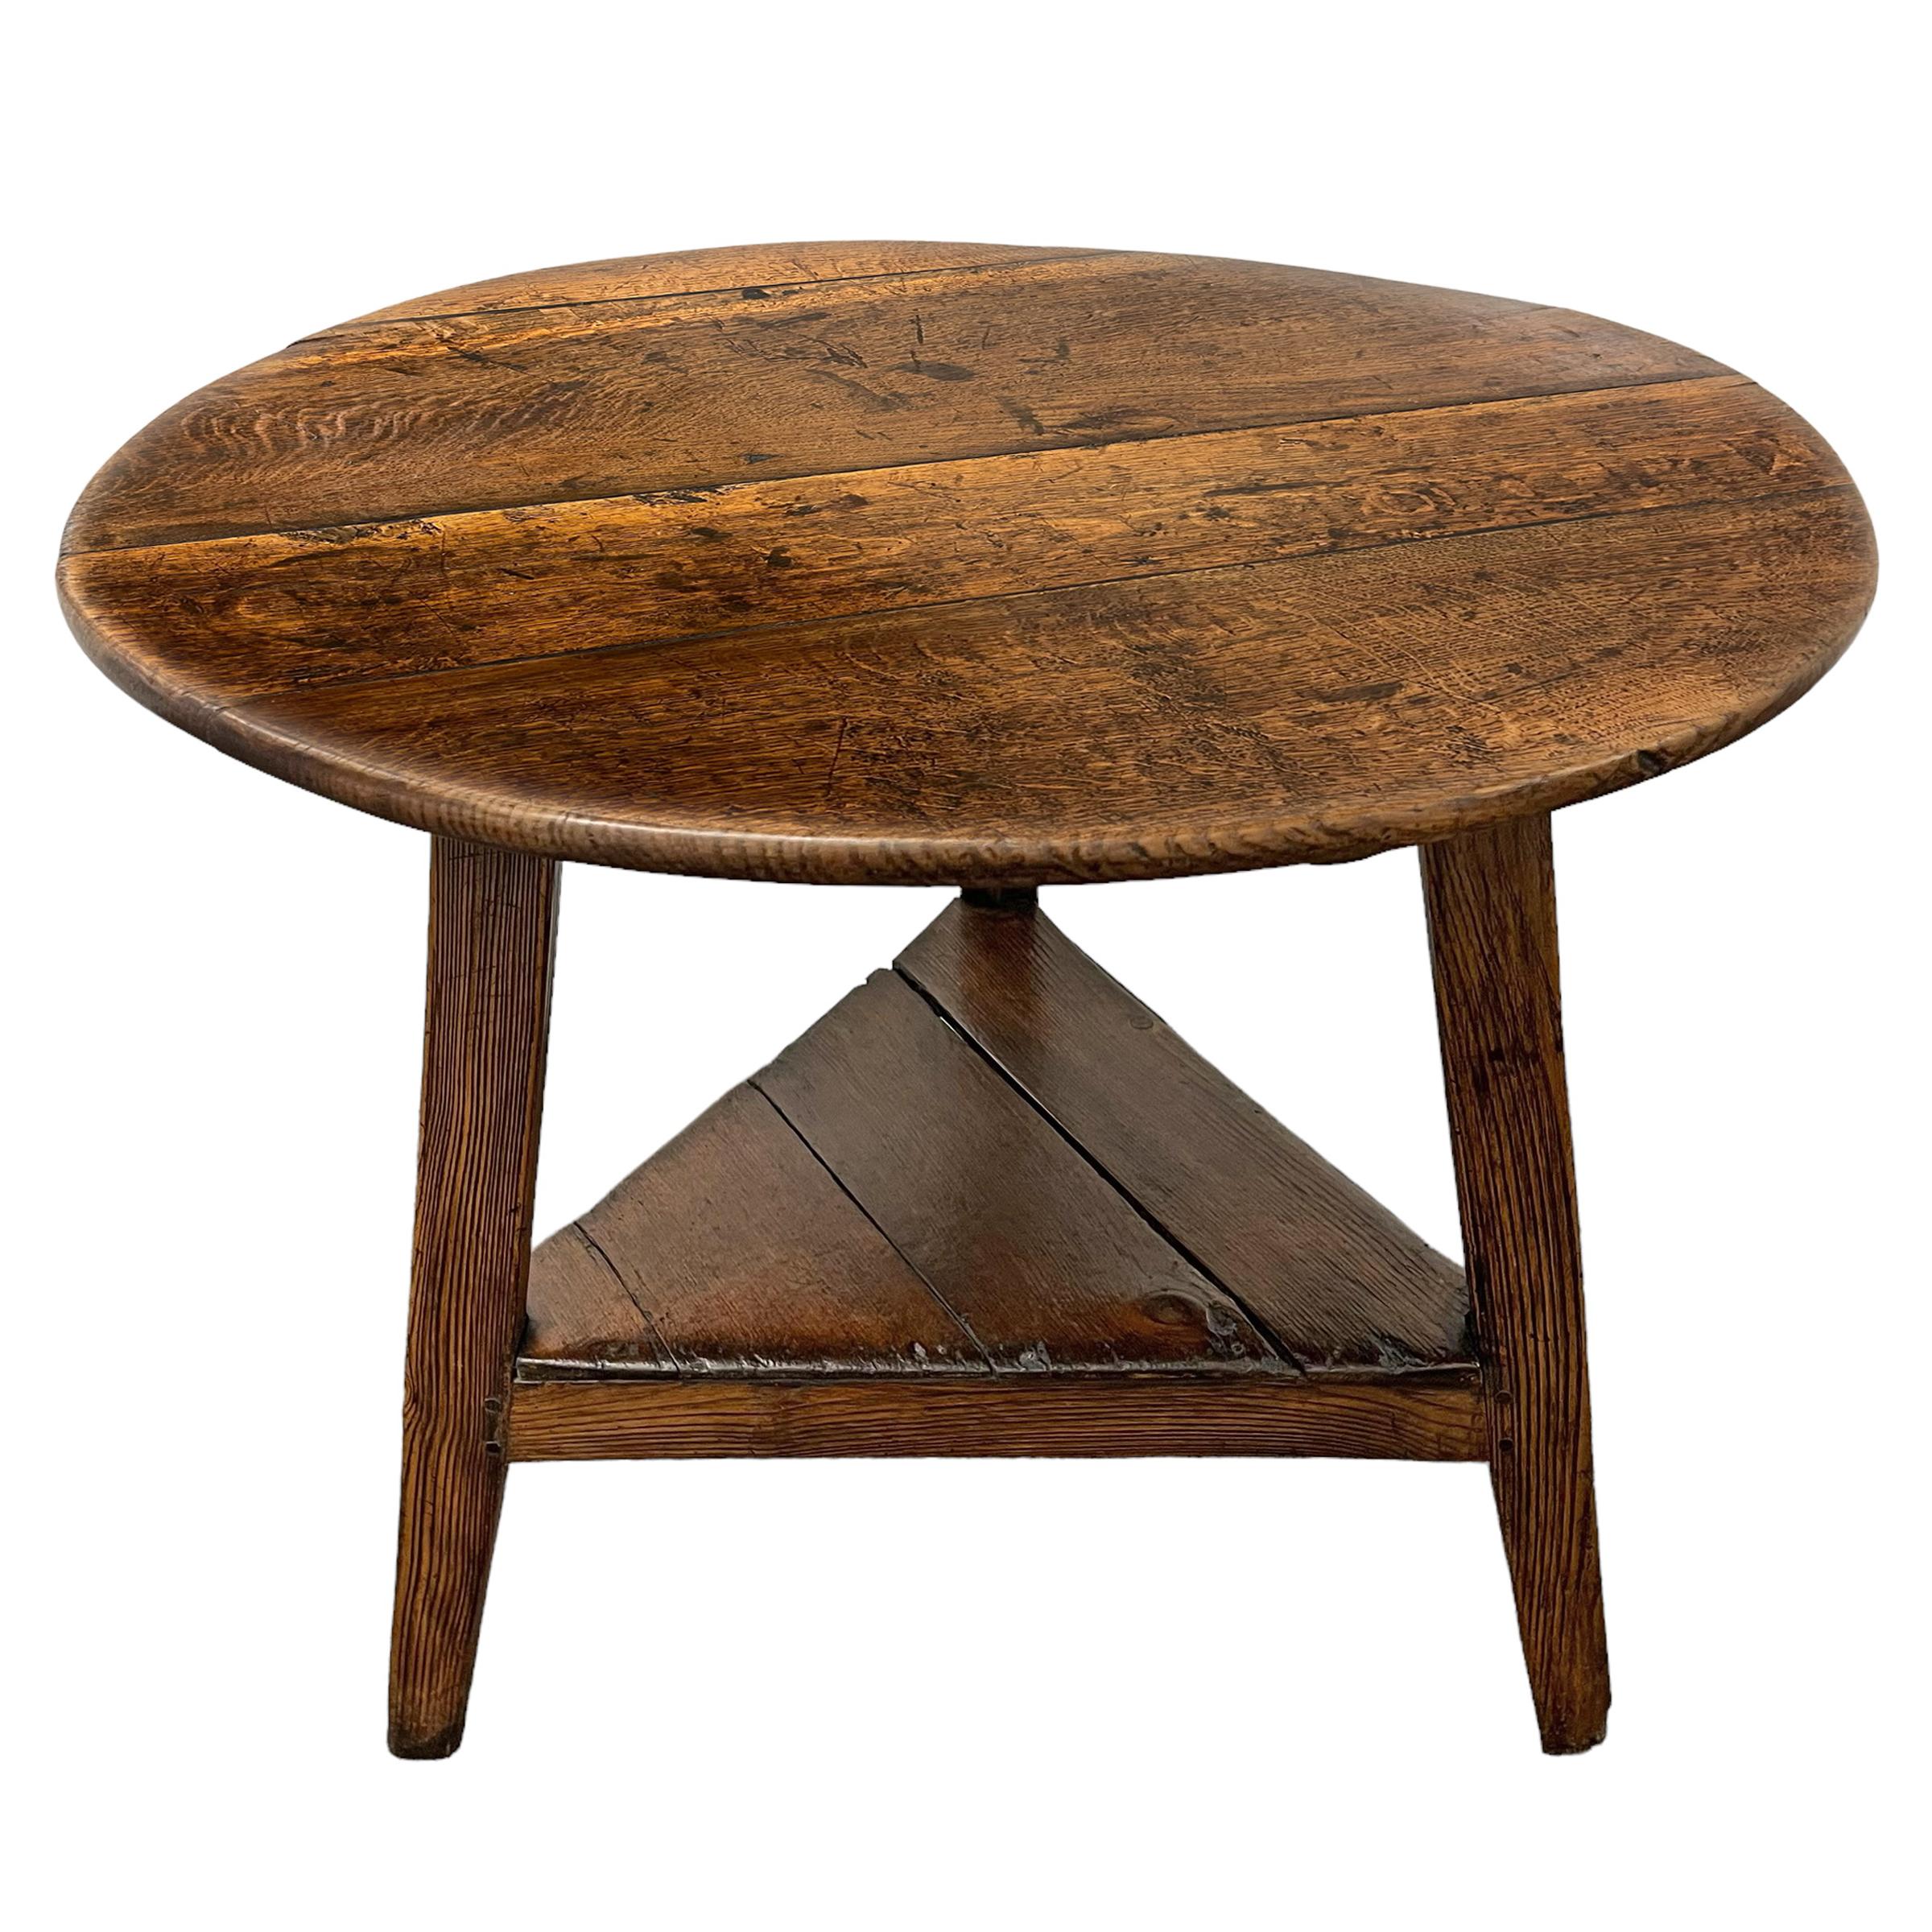 Elm Late 18th Century English Cricket Table with Shelf